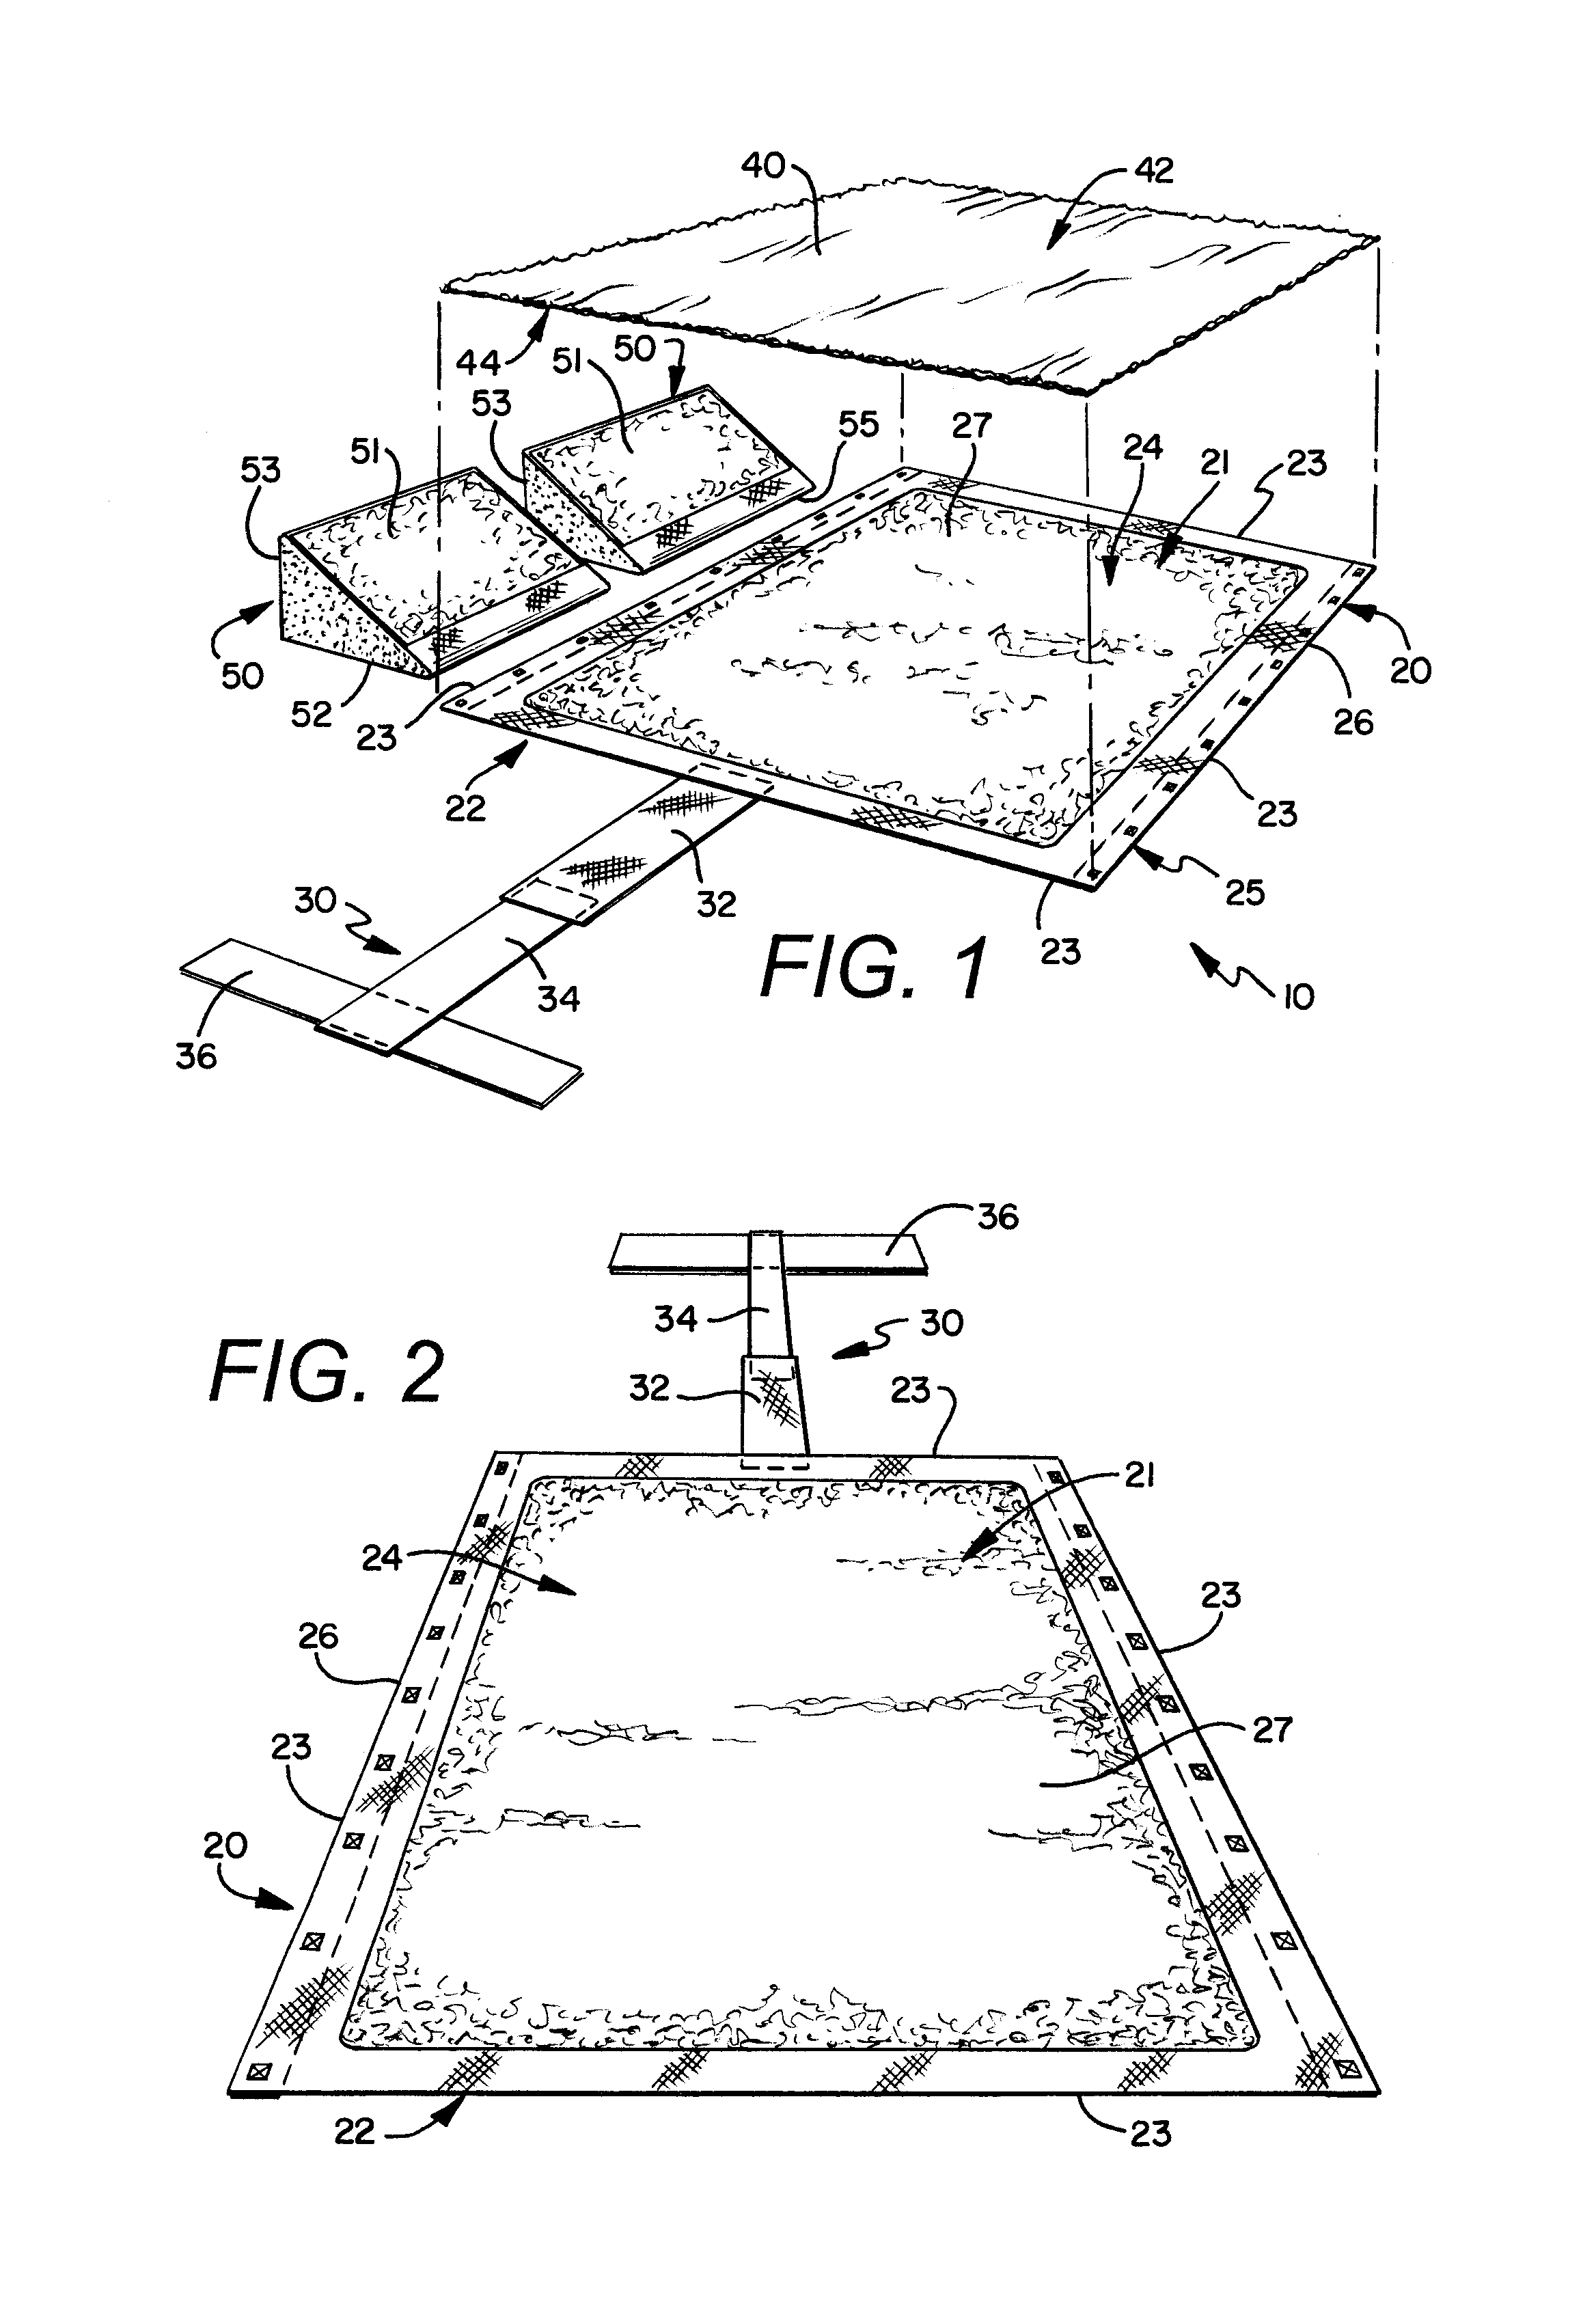 Apparatus and system for turning and positioning a patient